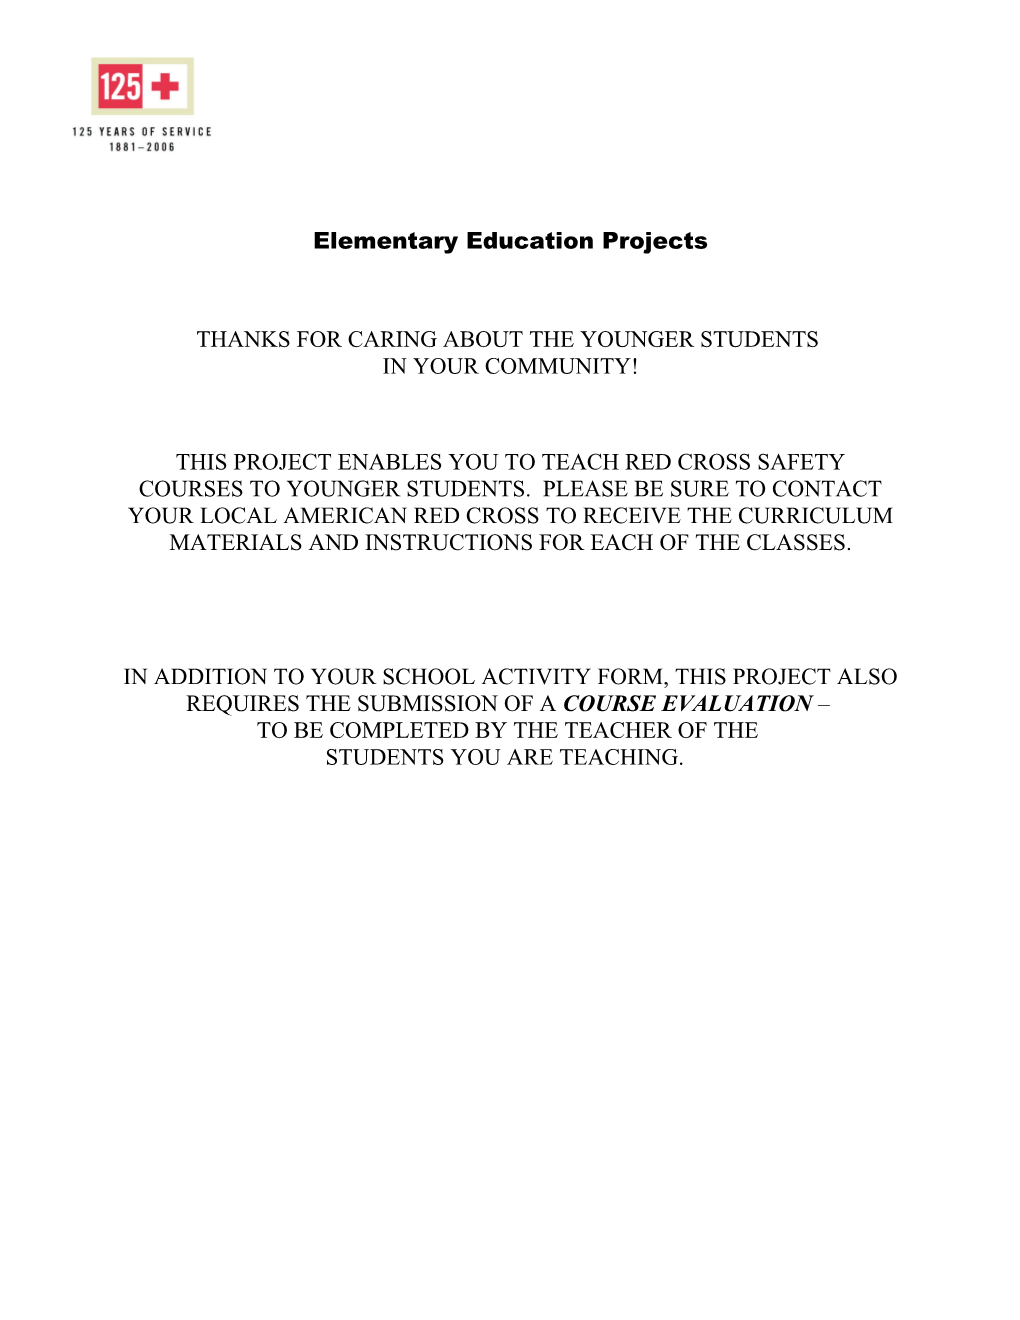 Elementary Education Projects